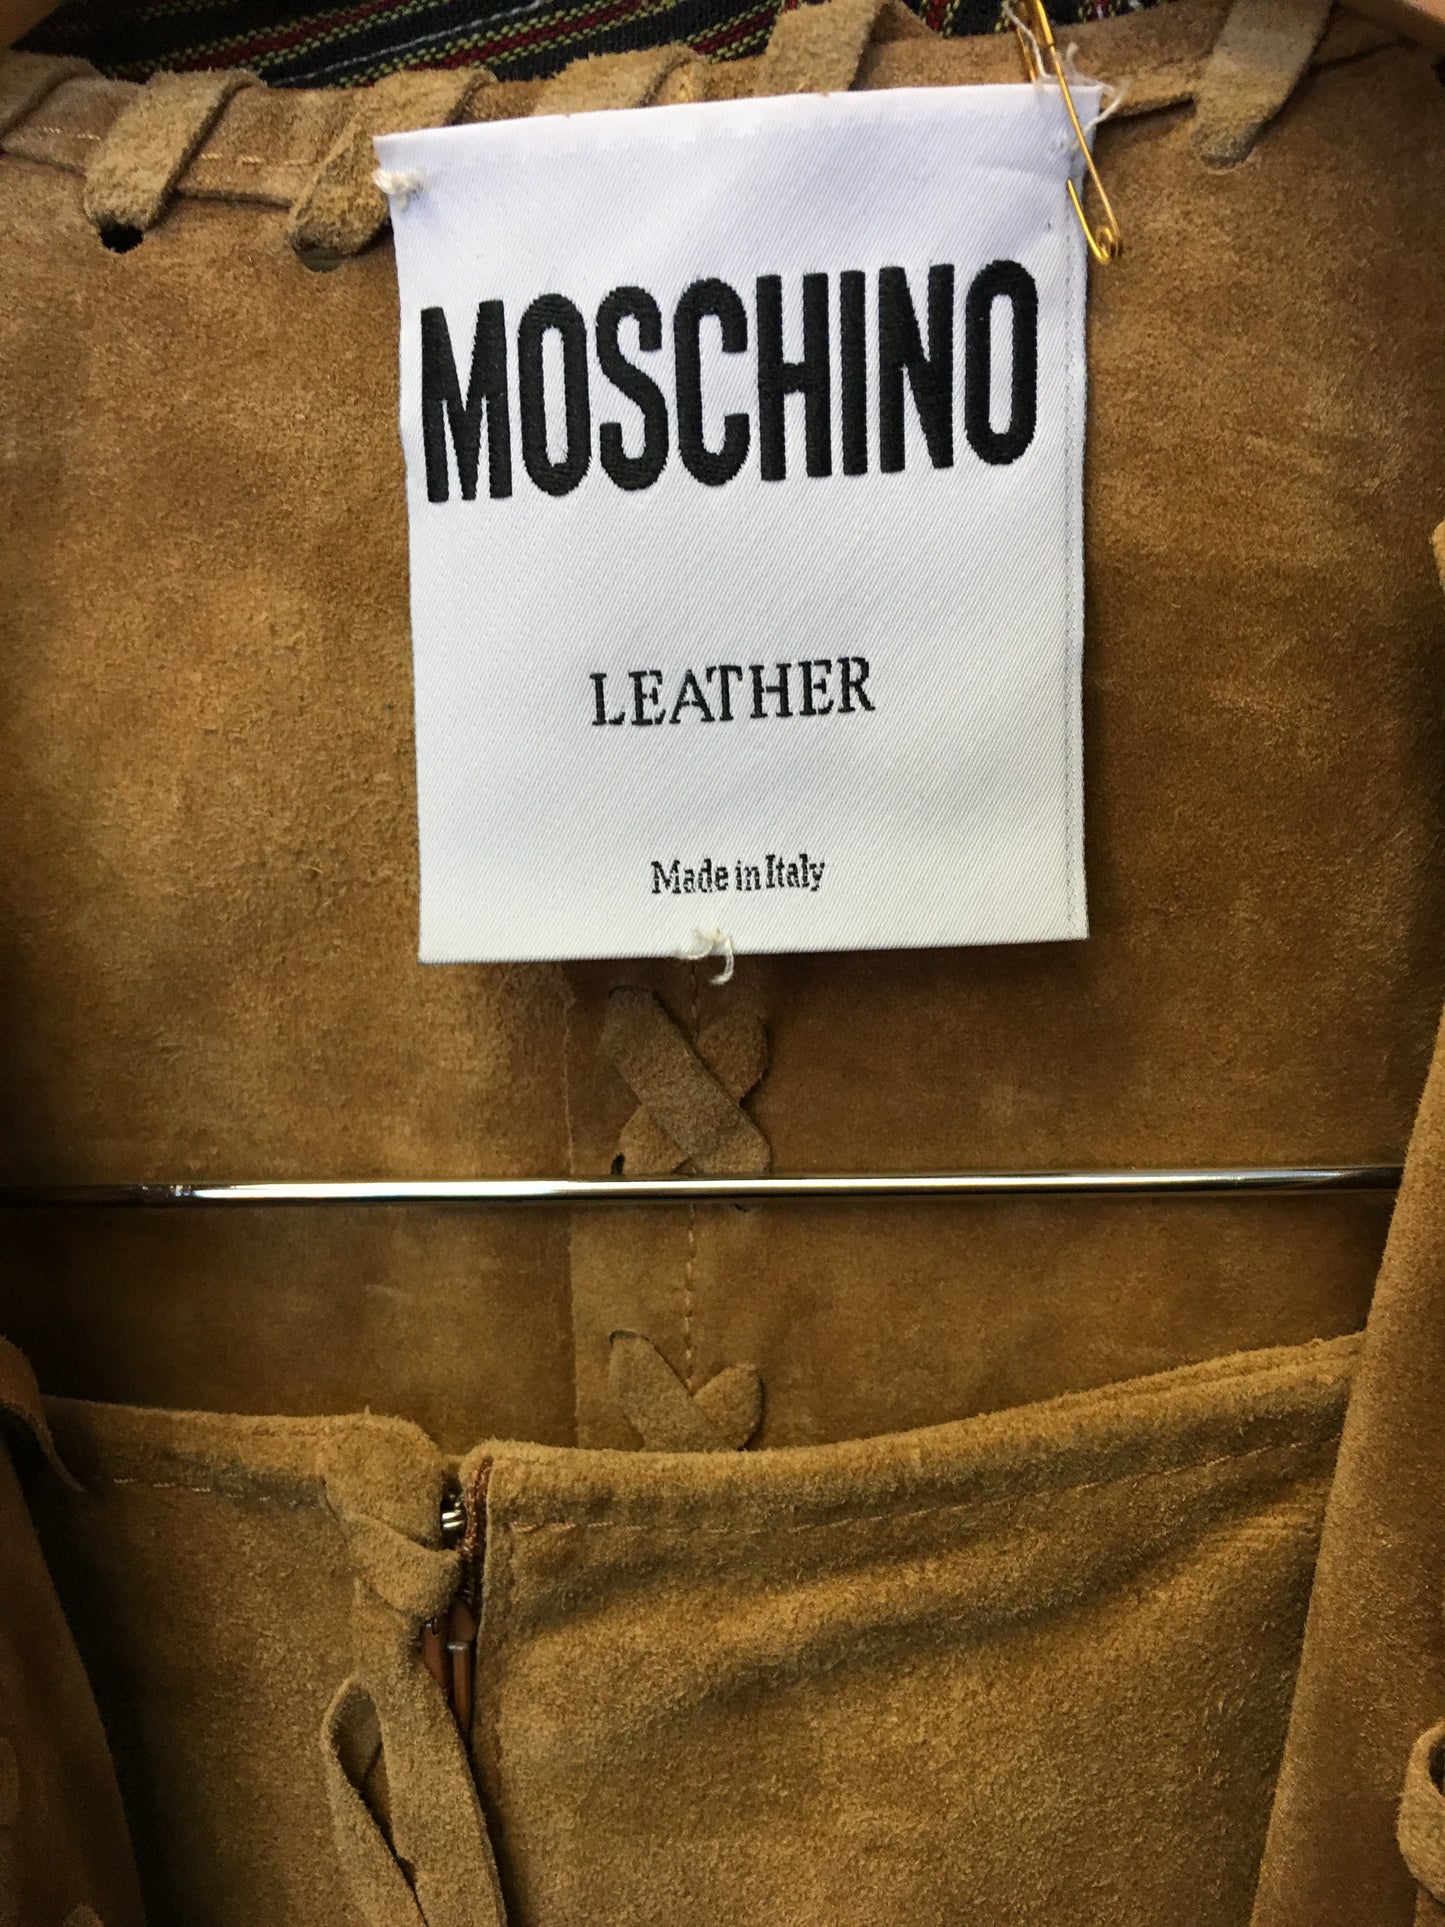 Vintage Moschino Leather suit